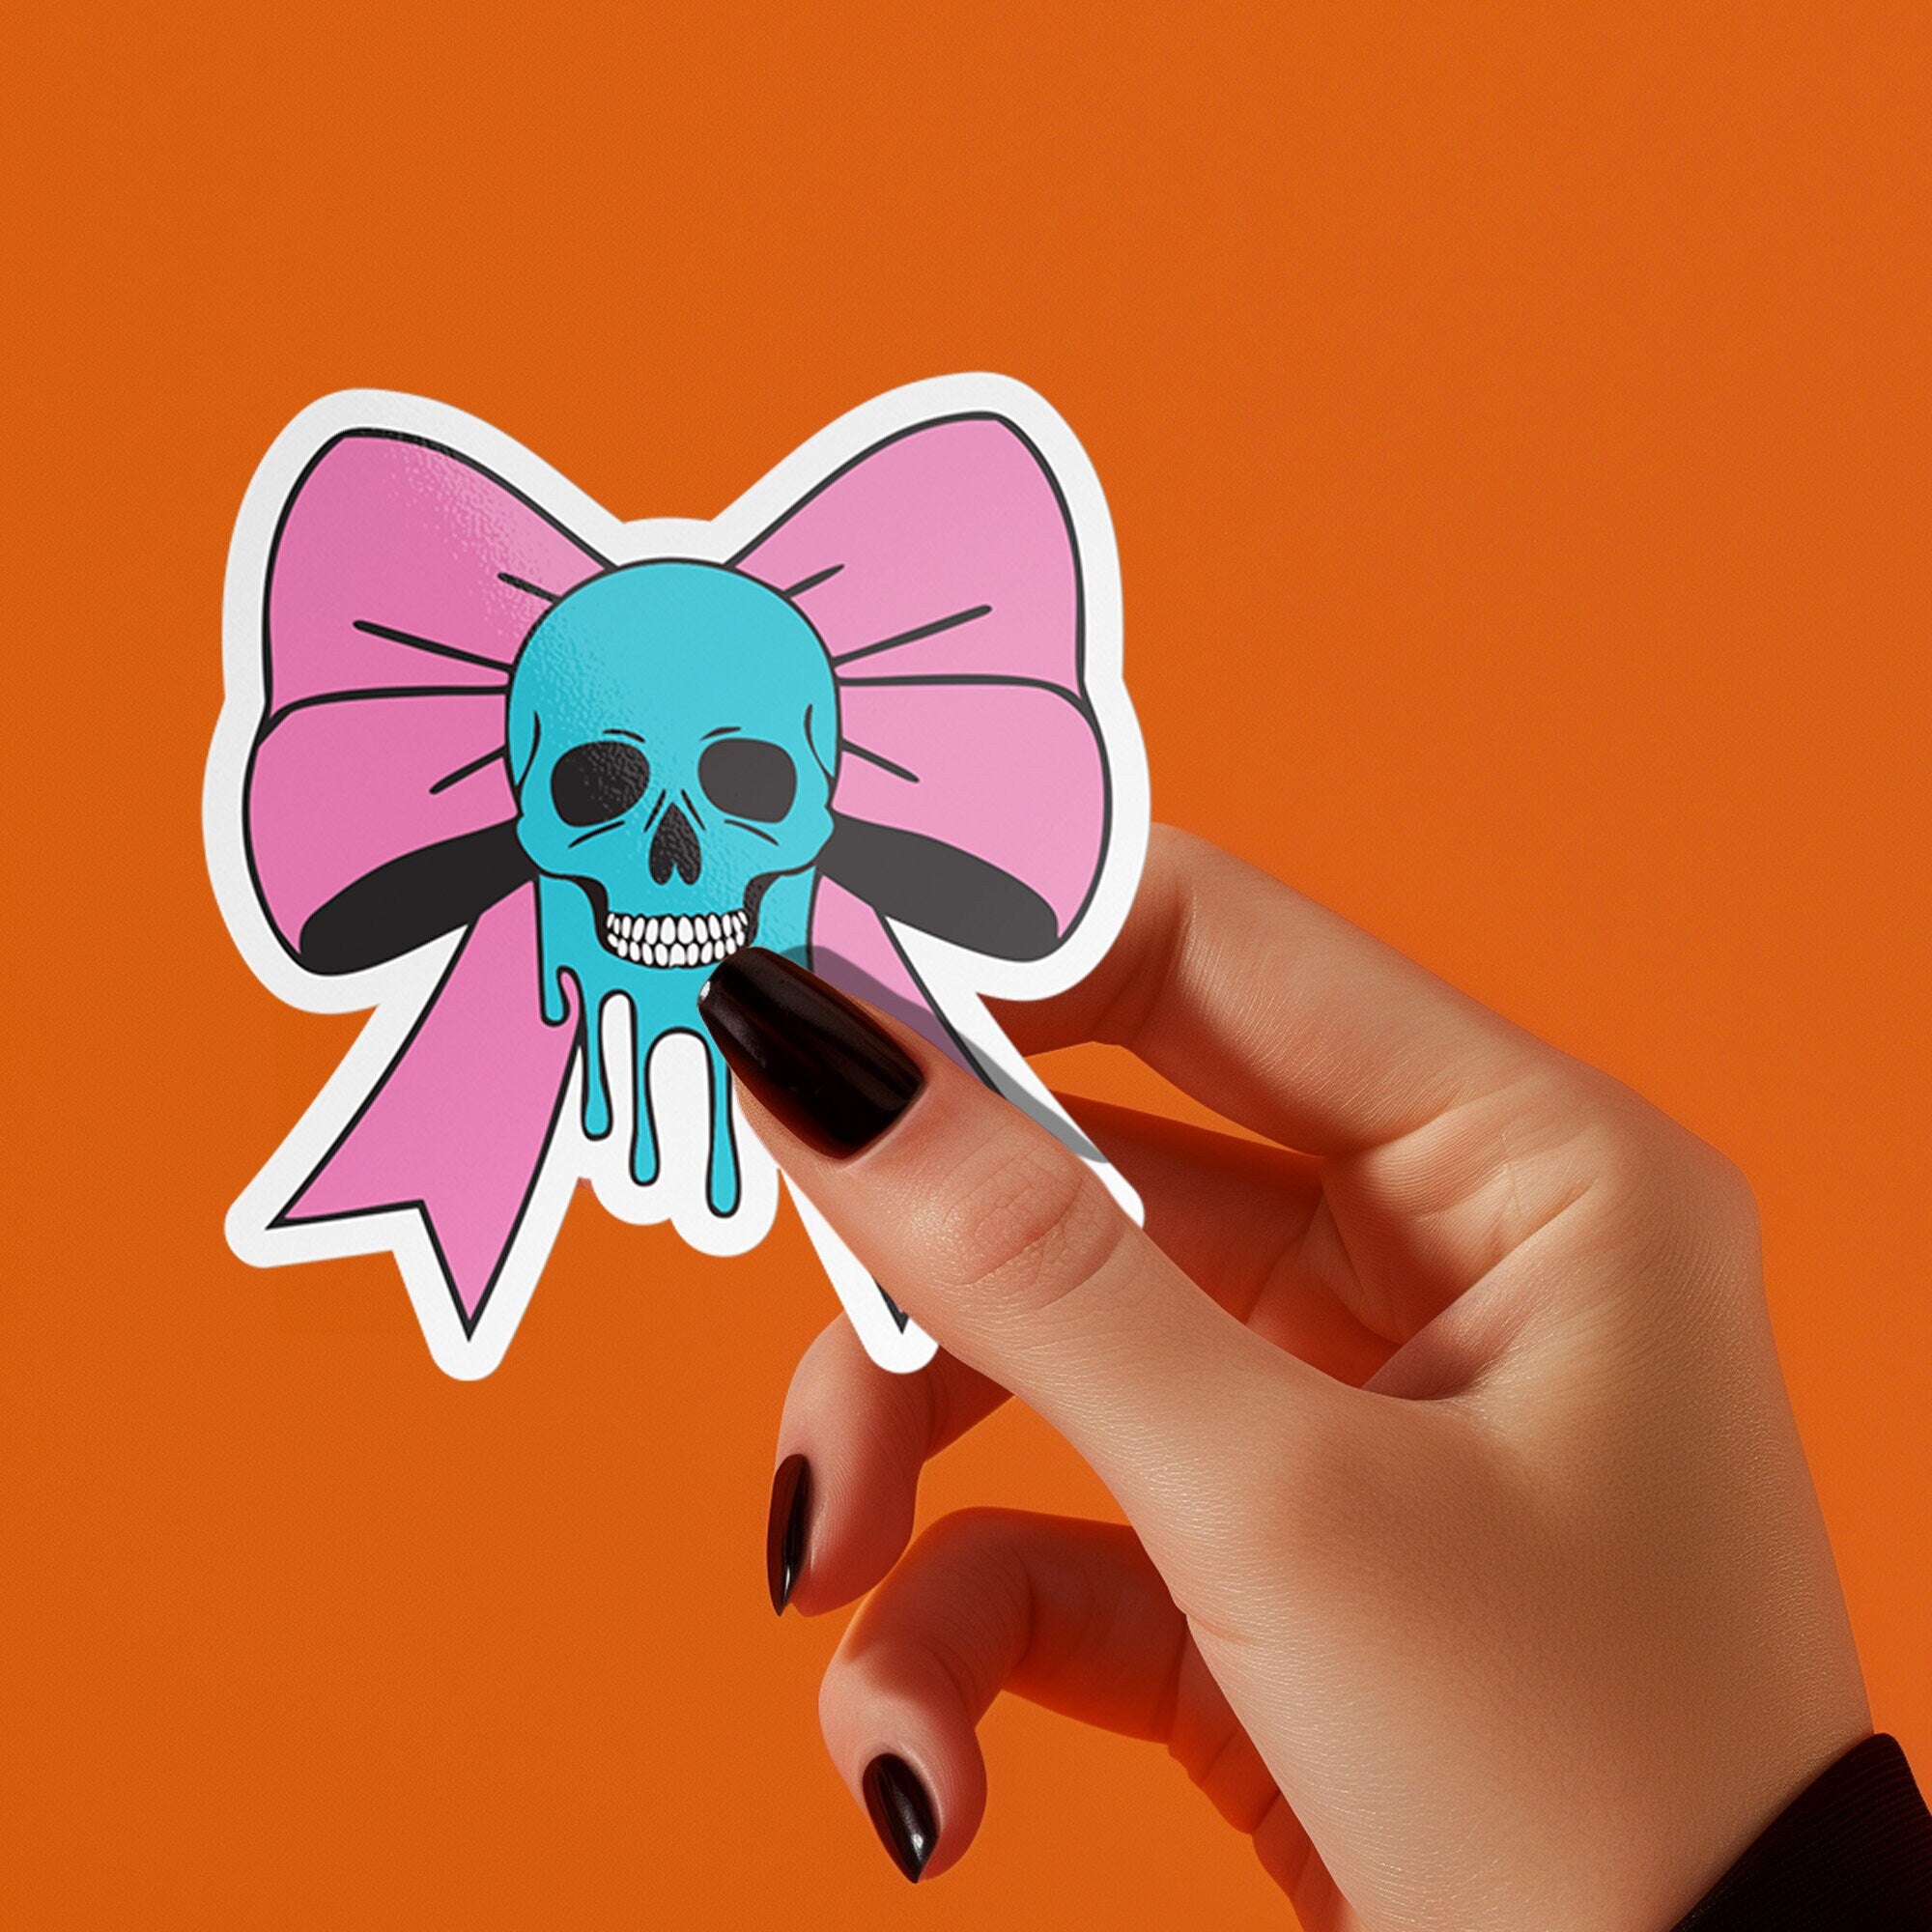 Pastel goth skull bow sticker with a blue skull and pink bow, perfect for creepy cute and punk lovers. Available in Prism, Gem, and Glitter finishes. Handmade in Austin, Texas.